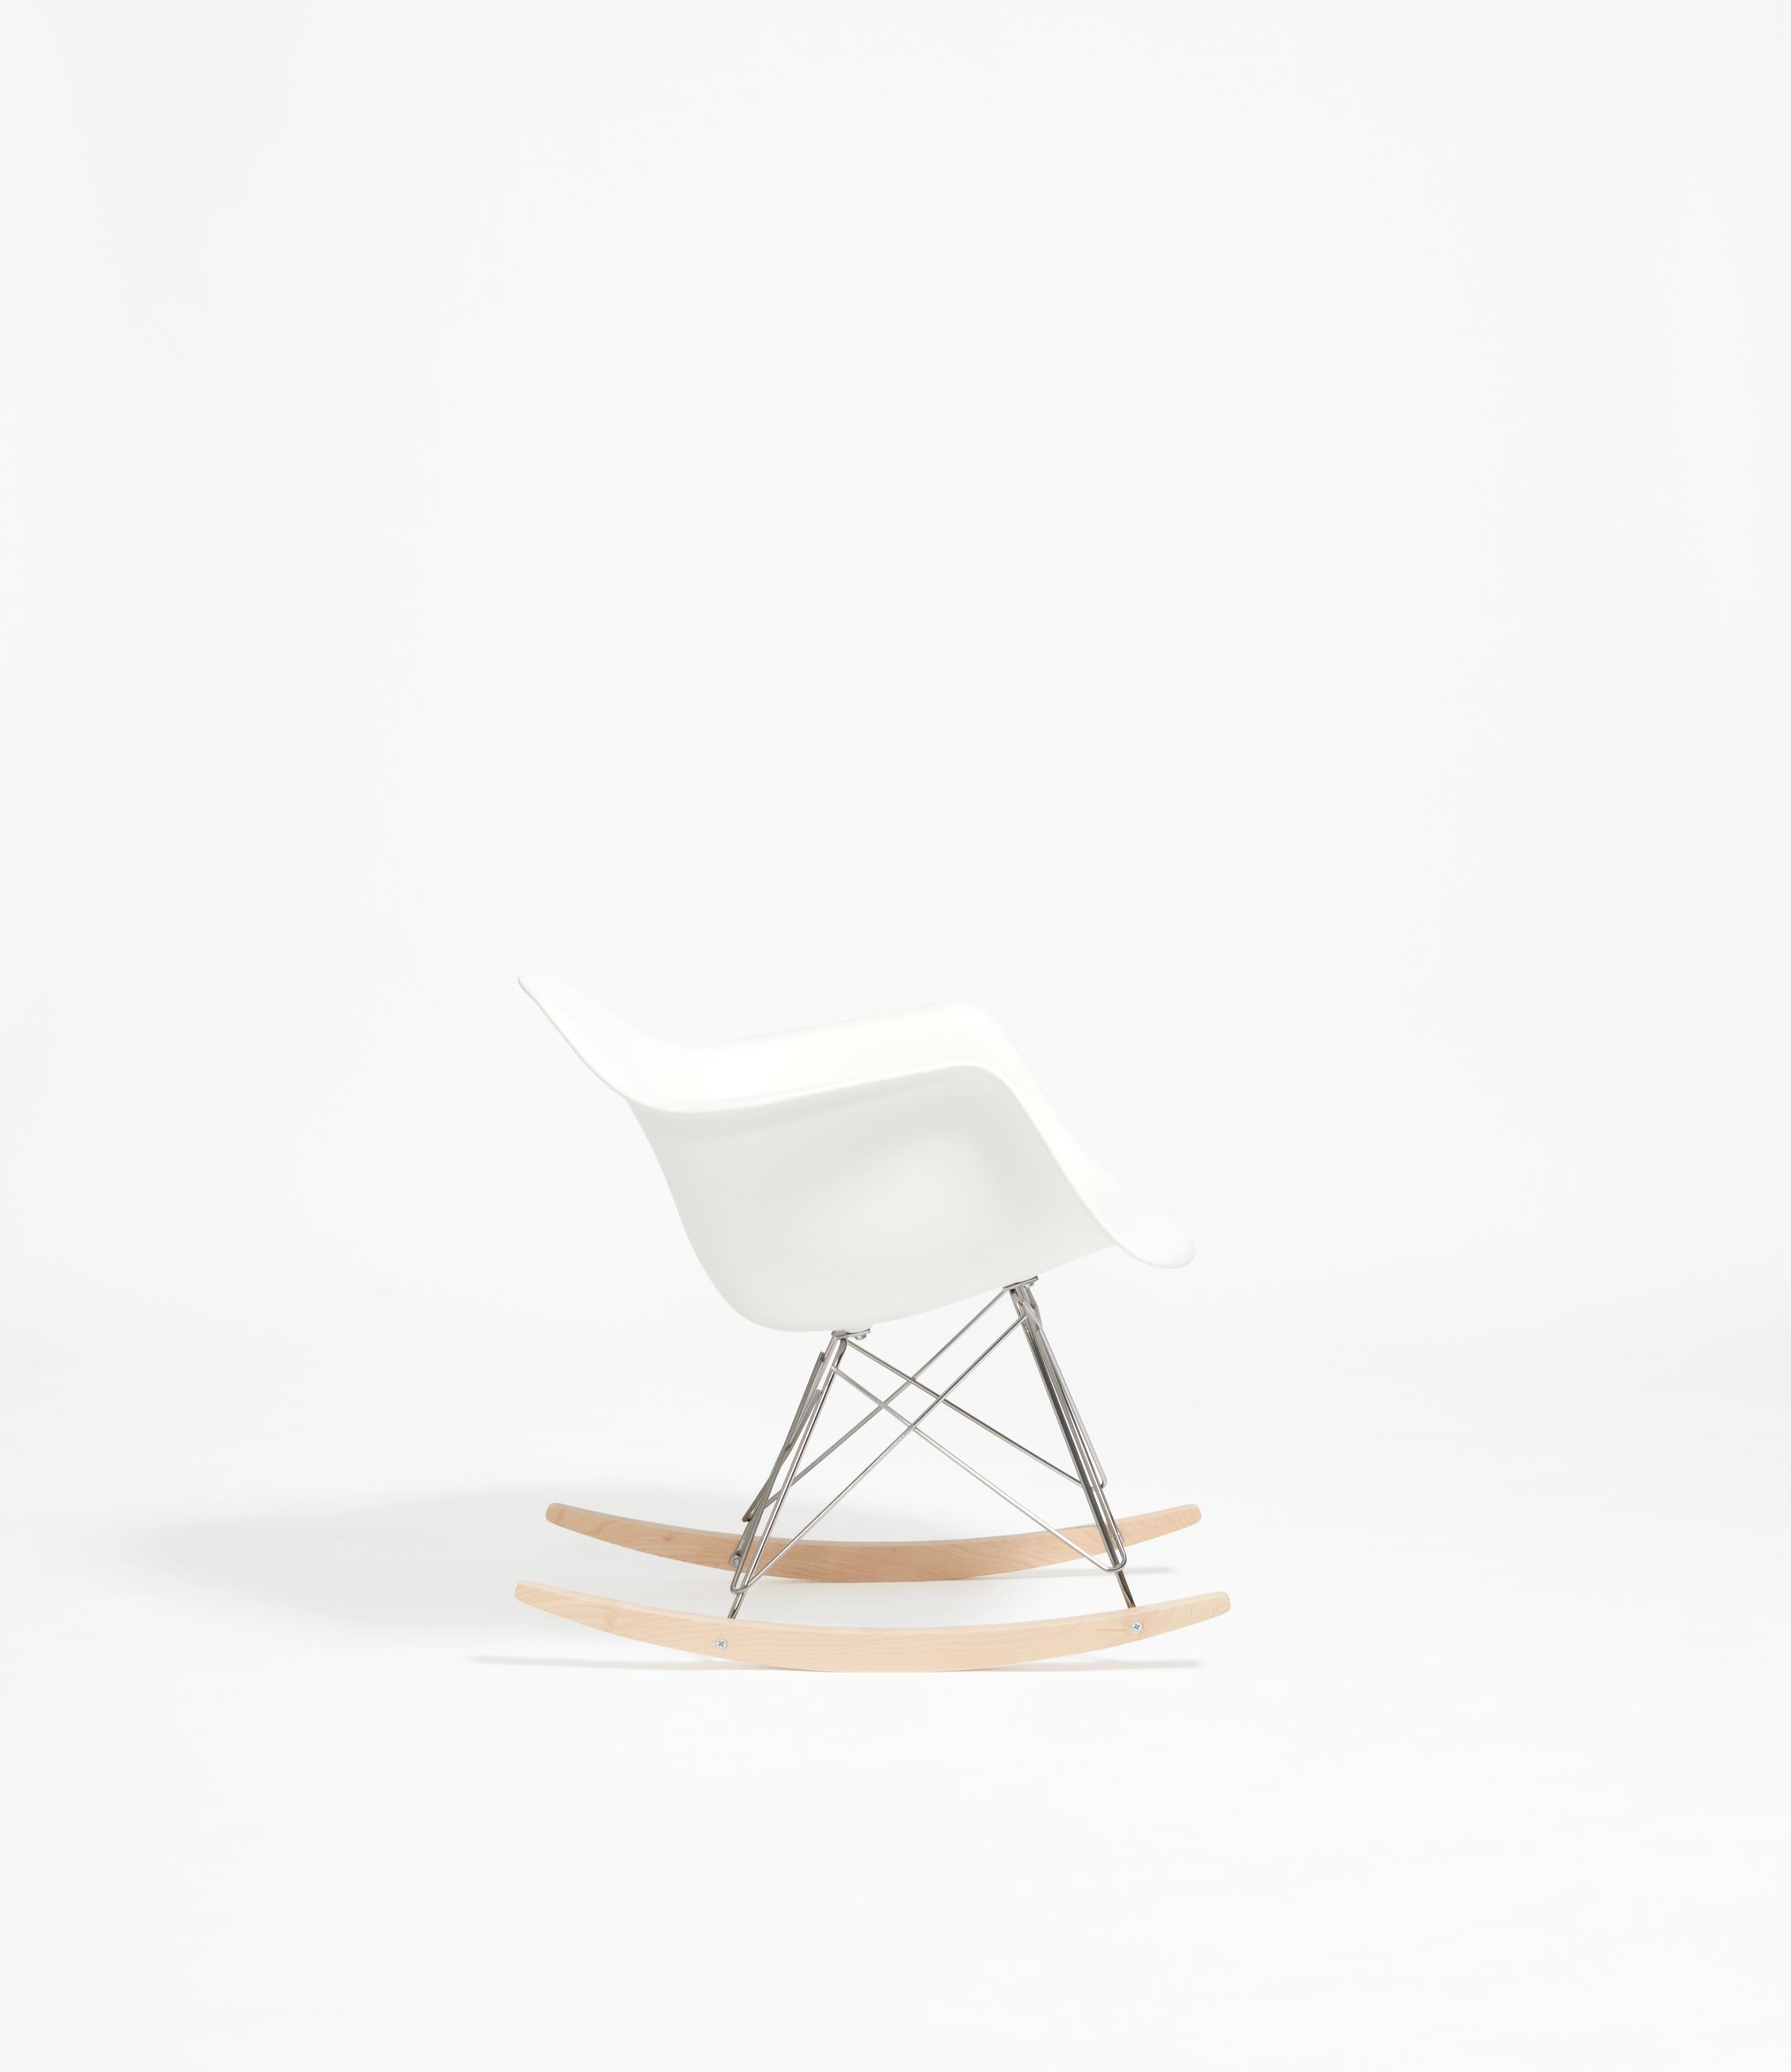 The series of plastic chairs created by Charles and Ray Eames for Vitra are amongst the most recognised American furniture designs. A standout from this large family of chairs is the Rocking Armchair Rod Base (RAR), made of a lightweight